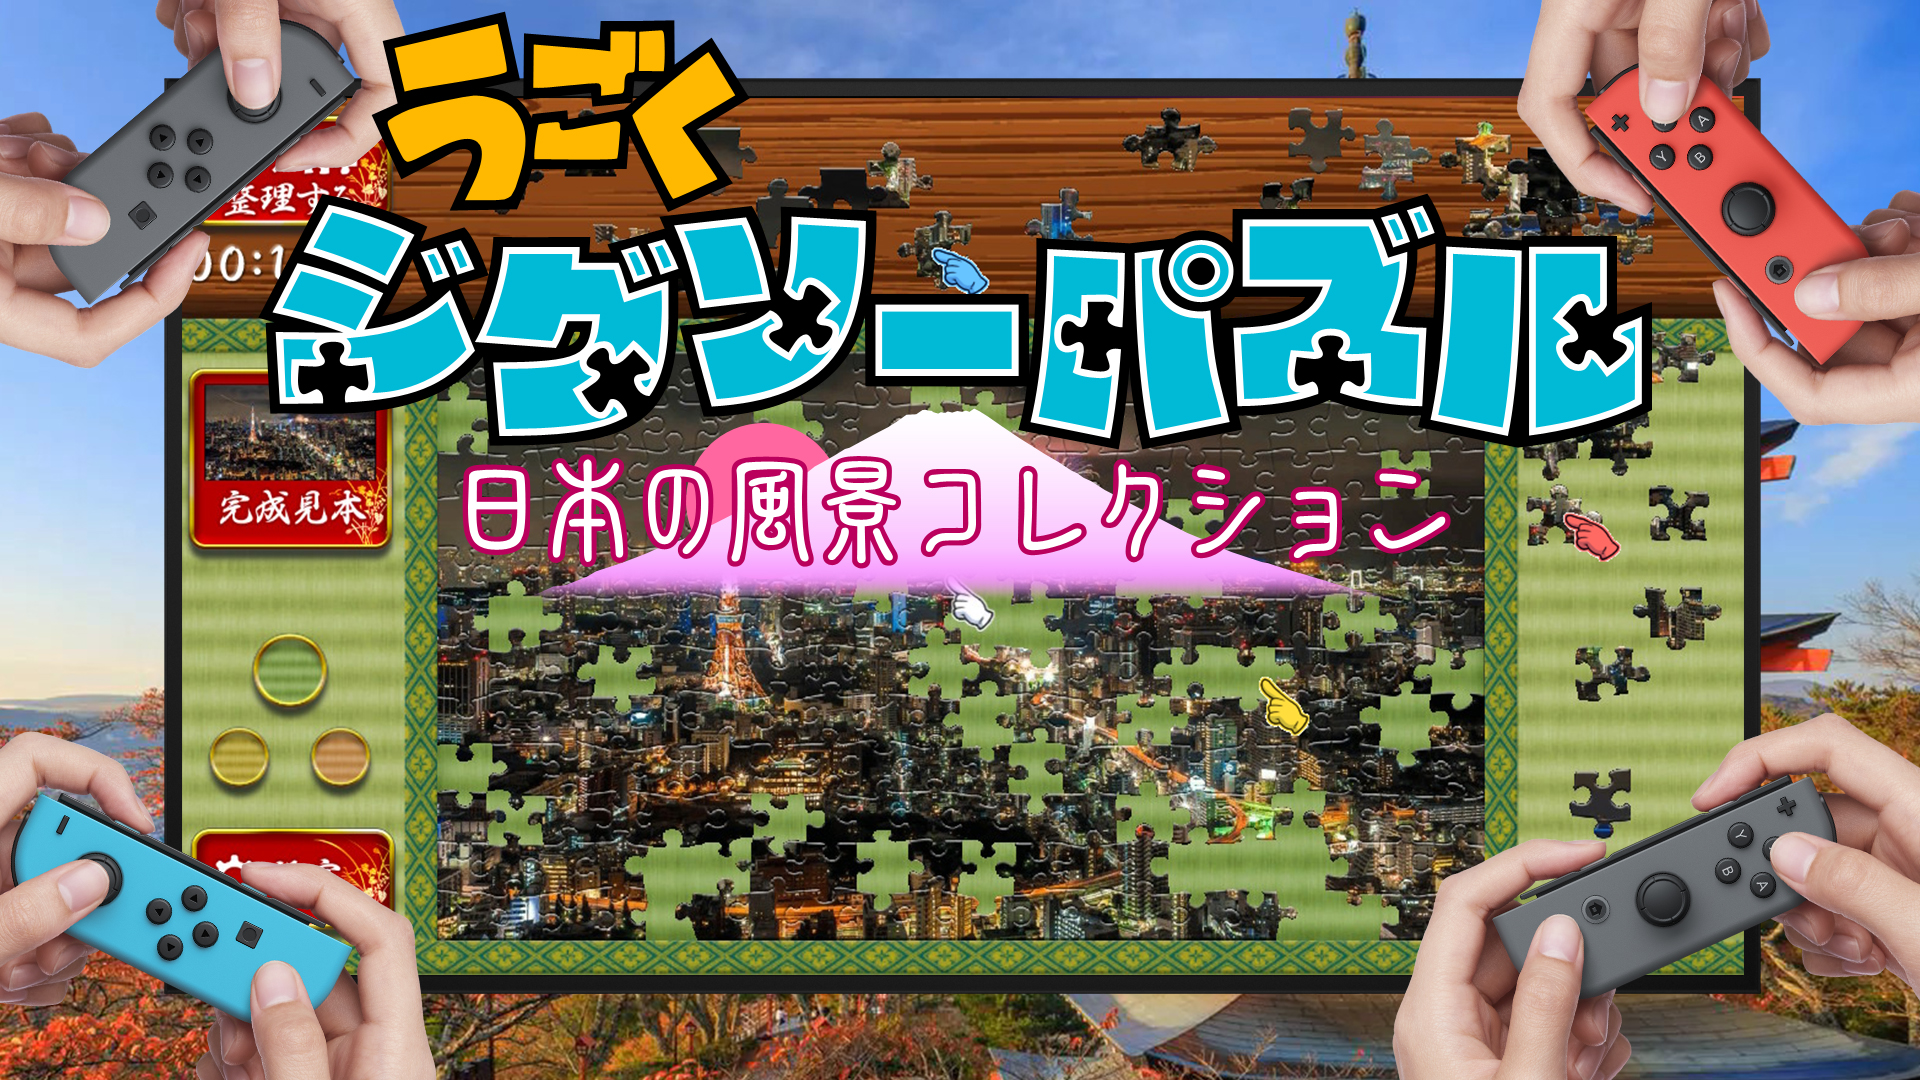 Collaboration with Rainy Frog LLC! Our first co-launch, BottleCube Inc.'s &quot;Animated Jigsaws: Beautiful Japanese Scenery&quot; will be released for the Nintendo Switch on the 5th of April 2018, not just in Japan but in North America, Europe and Australia!